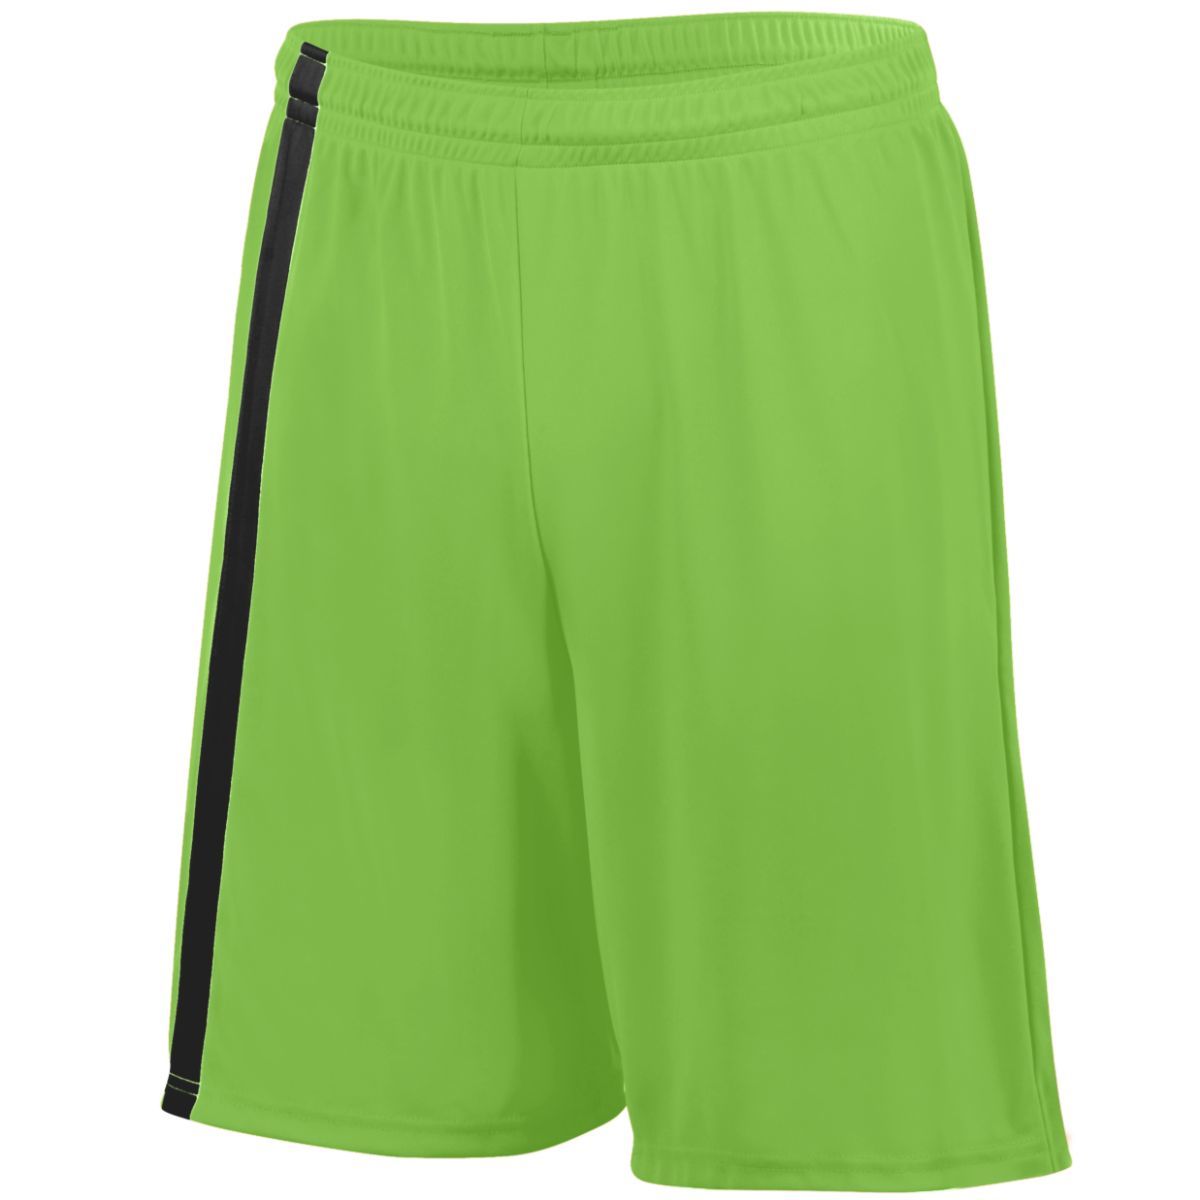 Augusta Sportswear Youth Attacking Third Shorts in Lime/Black  -Part of the Youth, Youth-Shorts, Augusta-Products, Soccer, All-Sports-1 product lines at KanaleyCreations.com